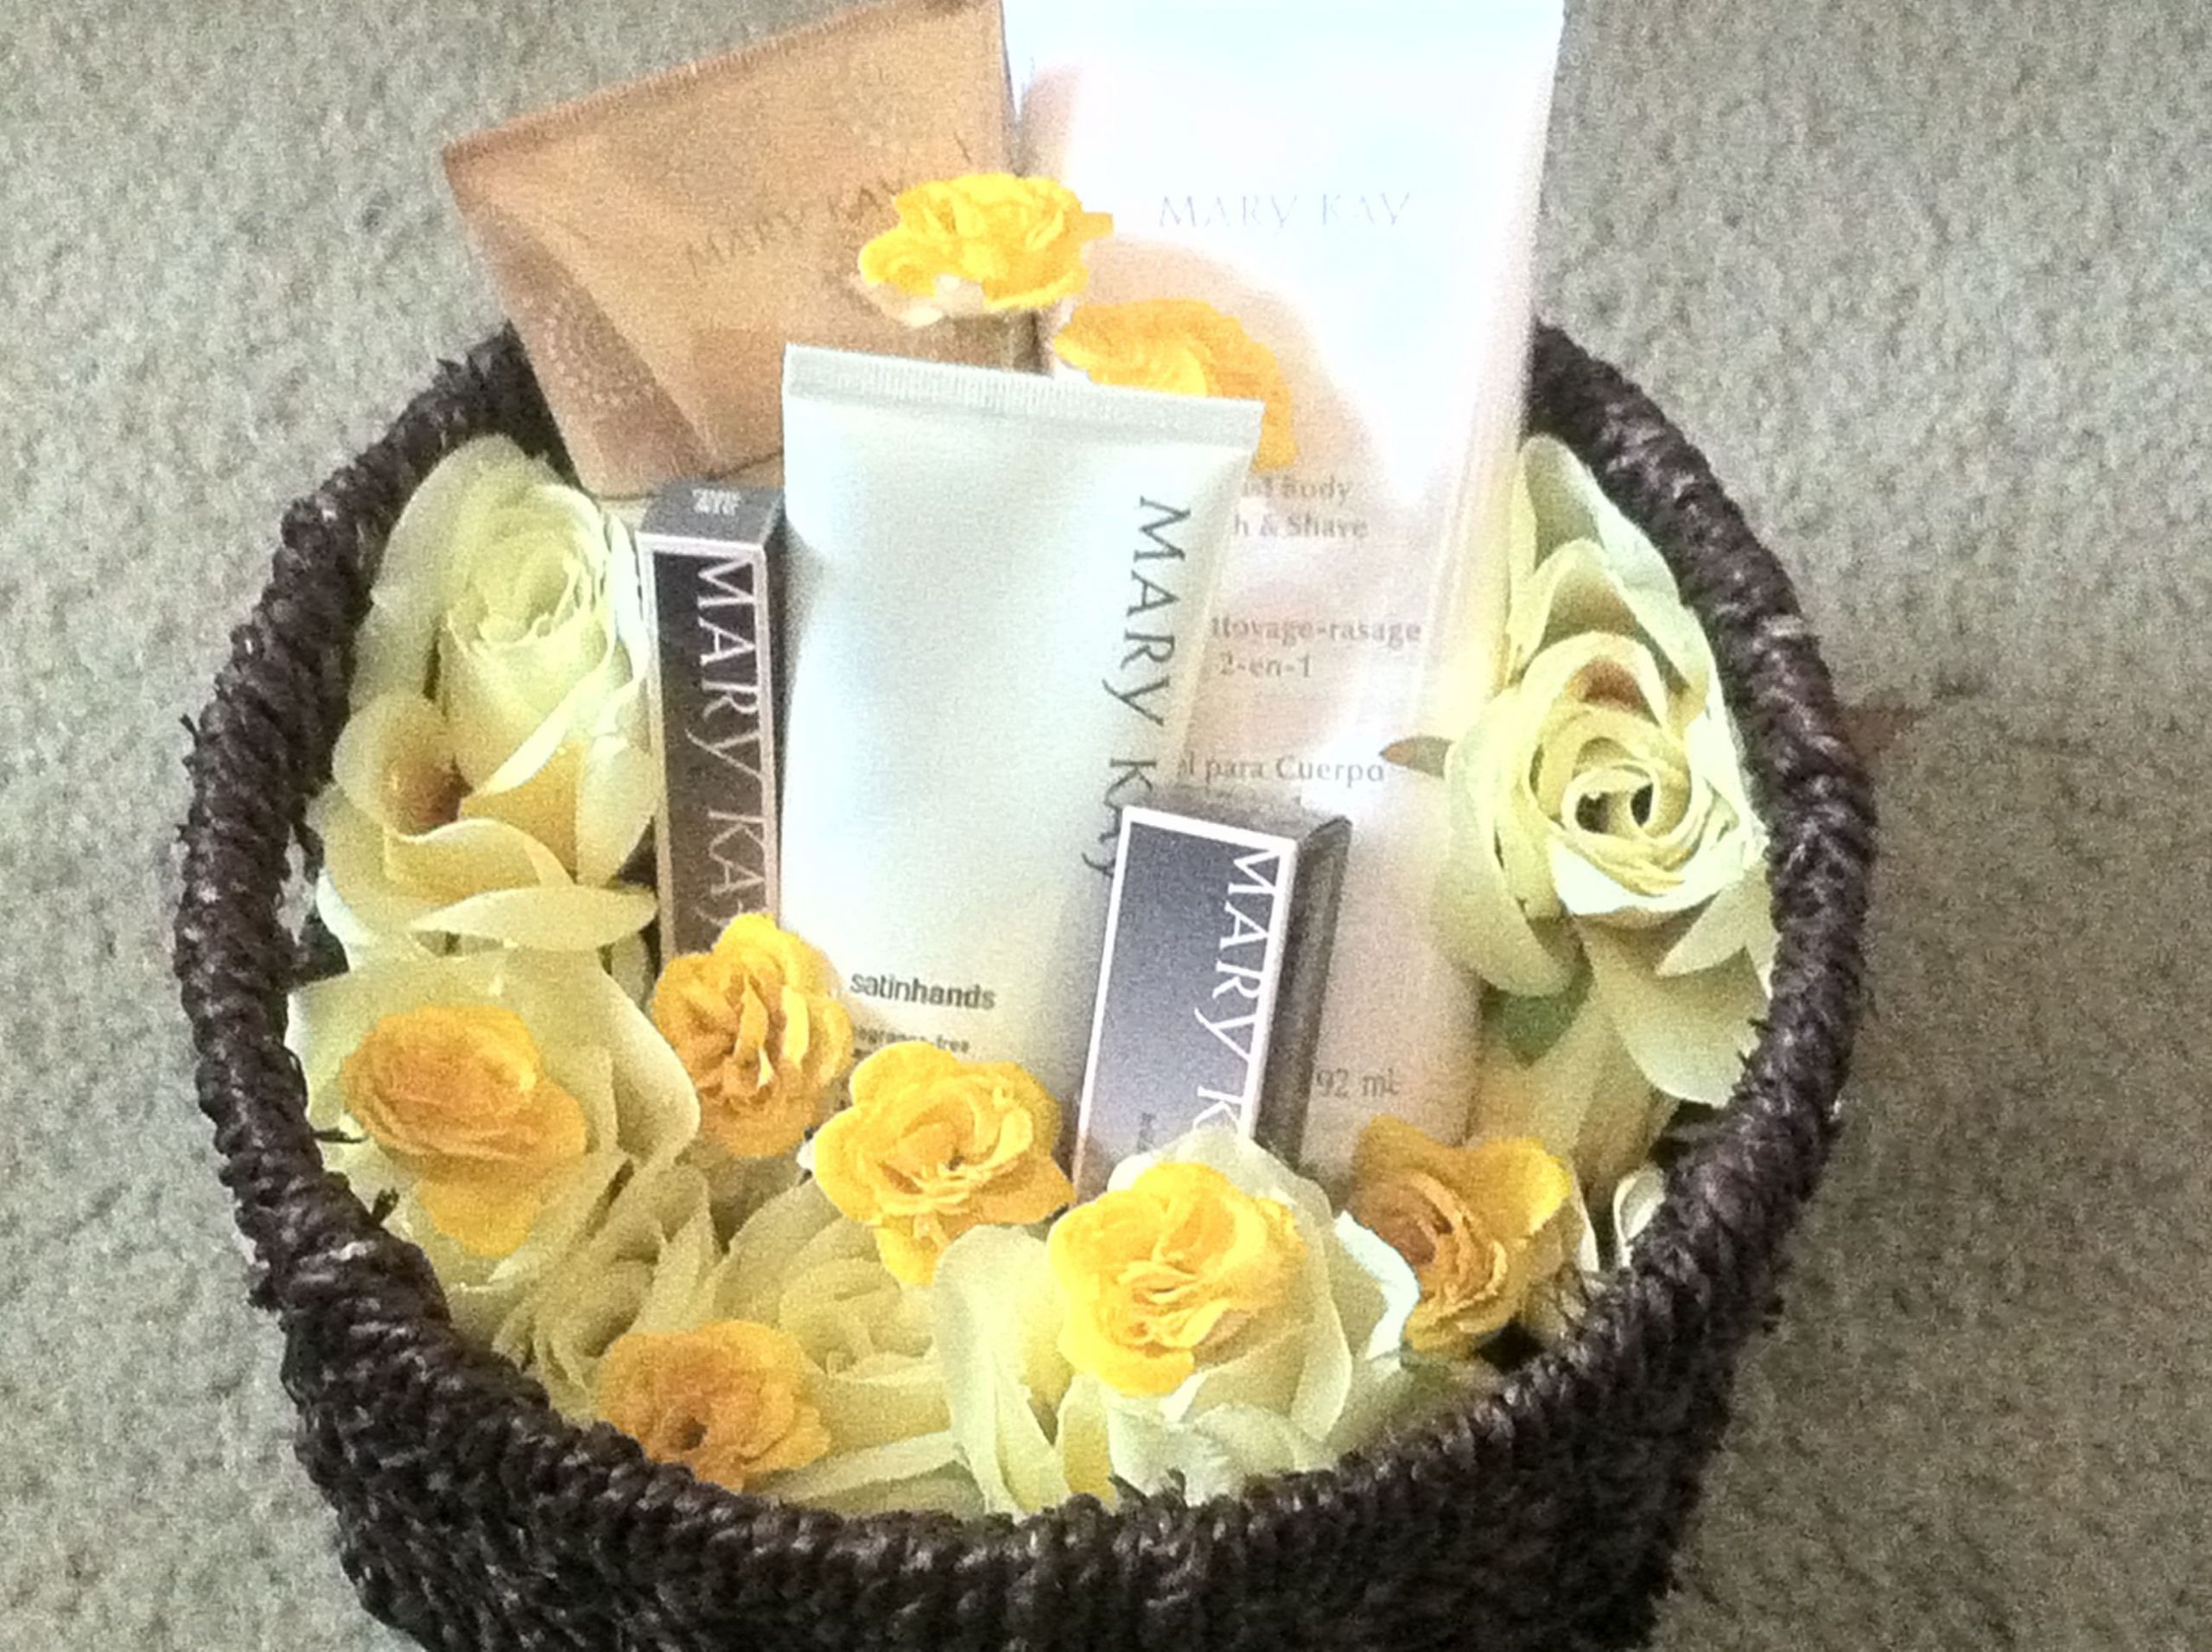 Mary Kay Mother'S Day Gift Basket Ideas
 This is a Mothers Day Mary Kay basket I made for a client